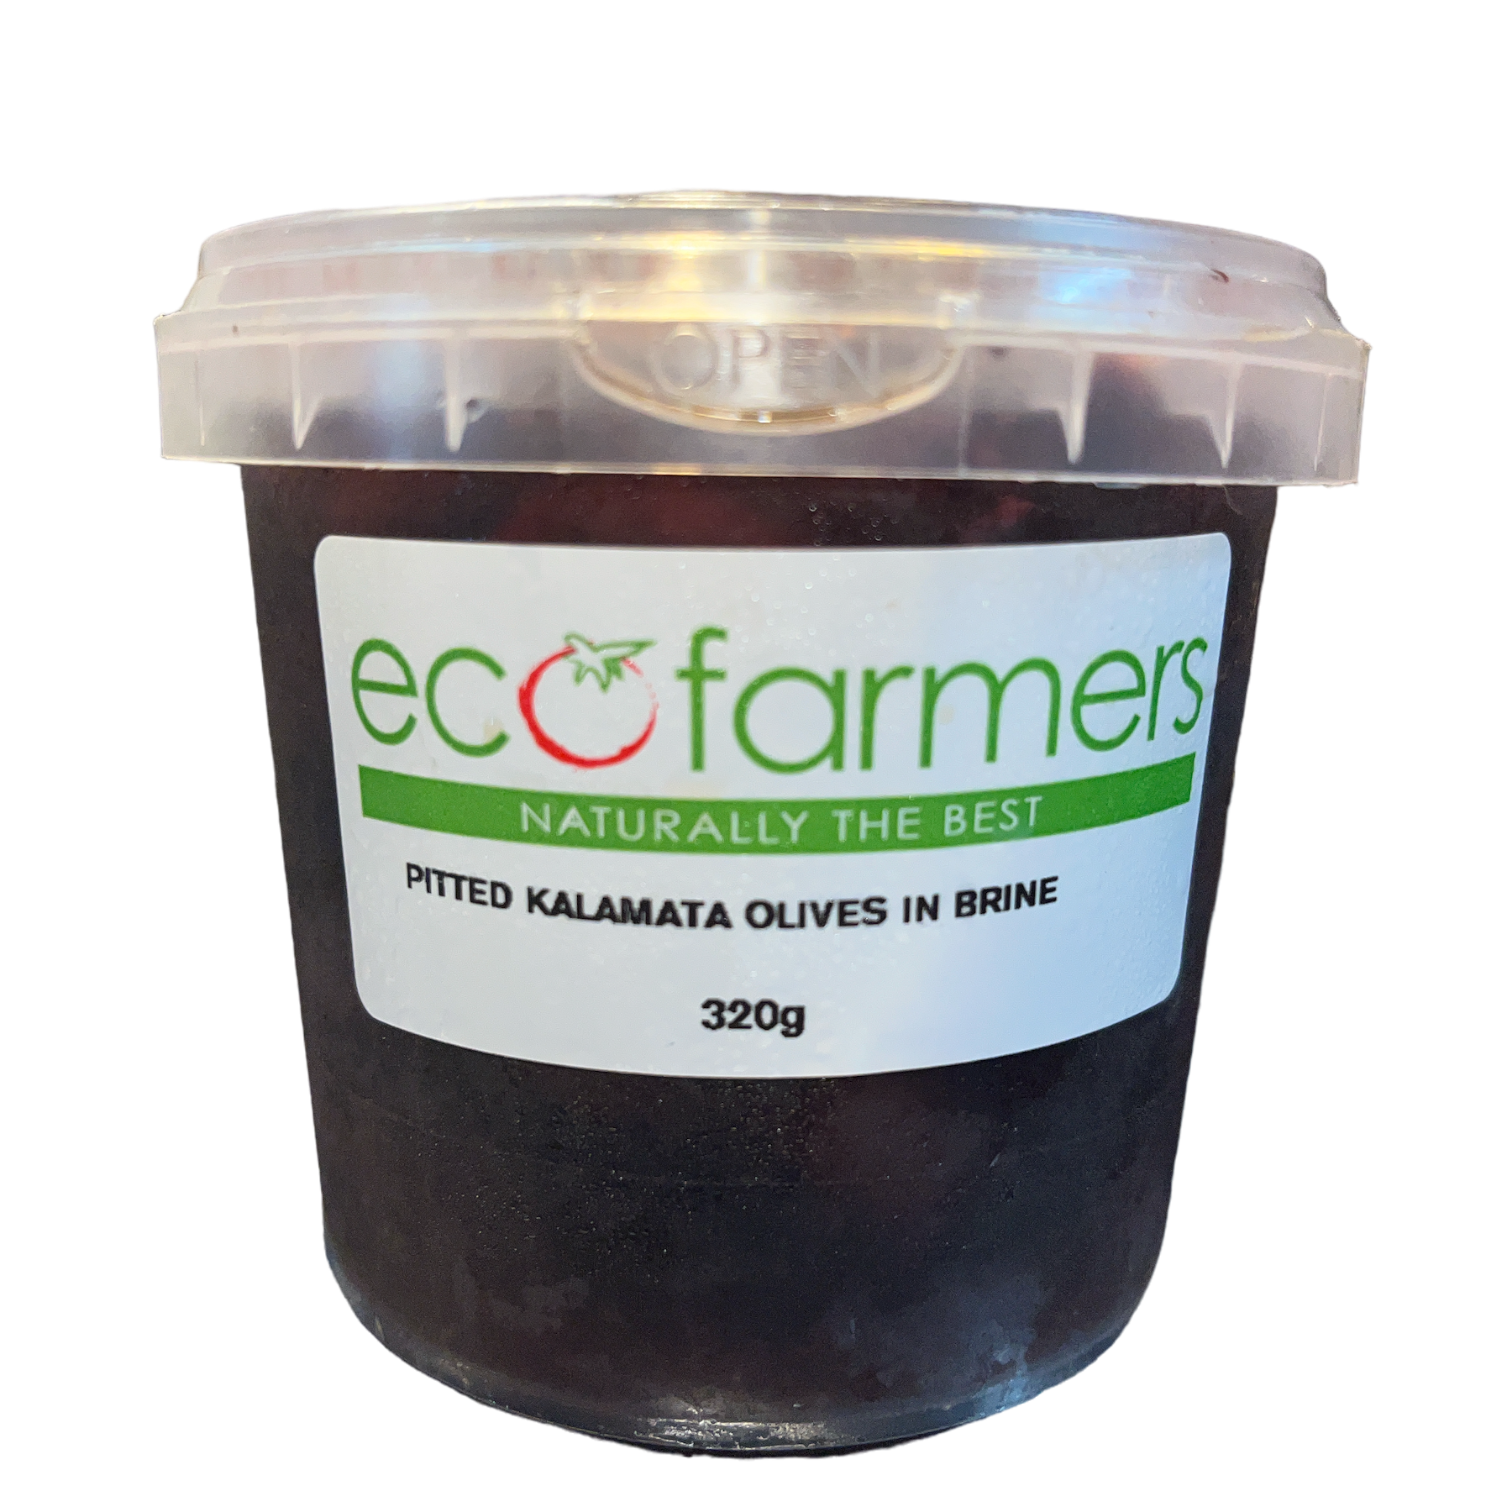 Eco Farmers Pitted Kalamata Olives in Brine 320g